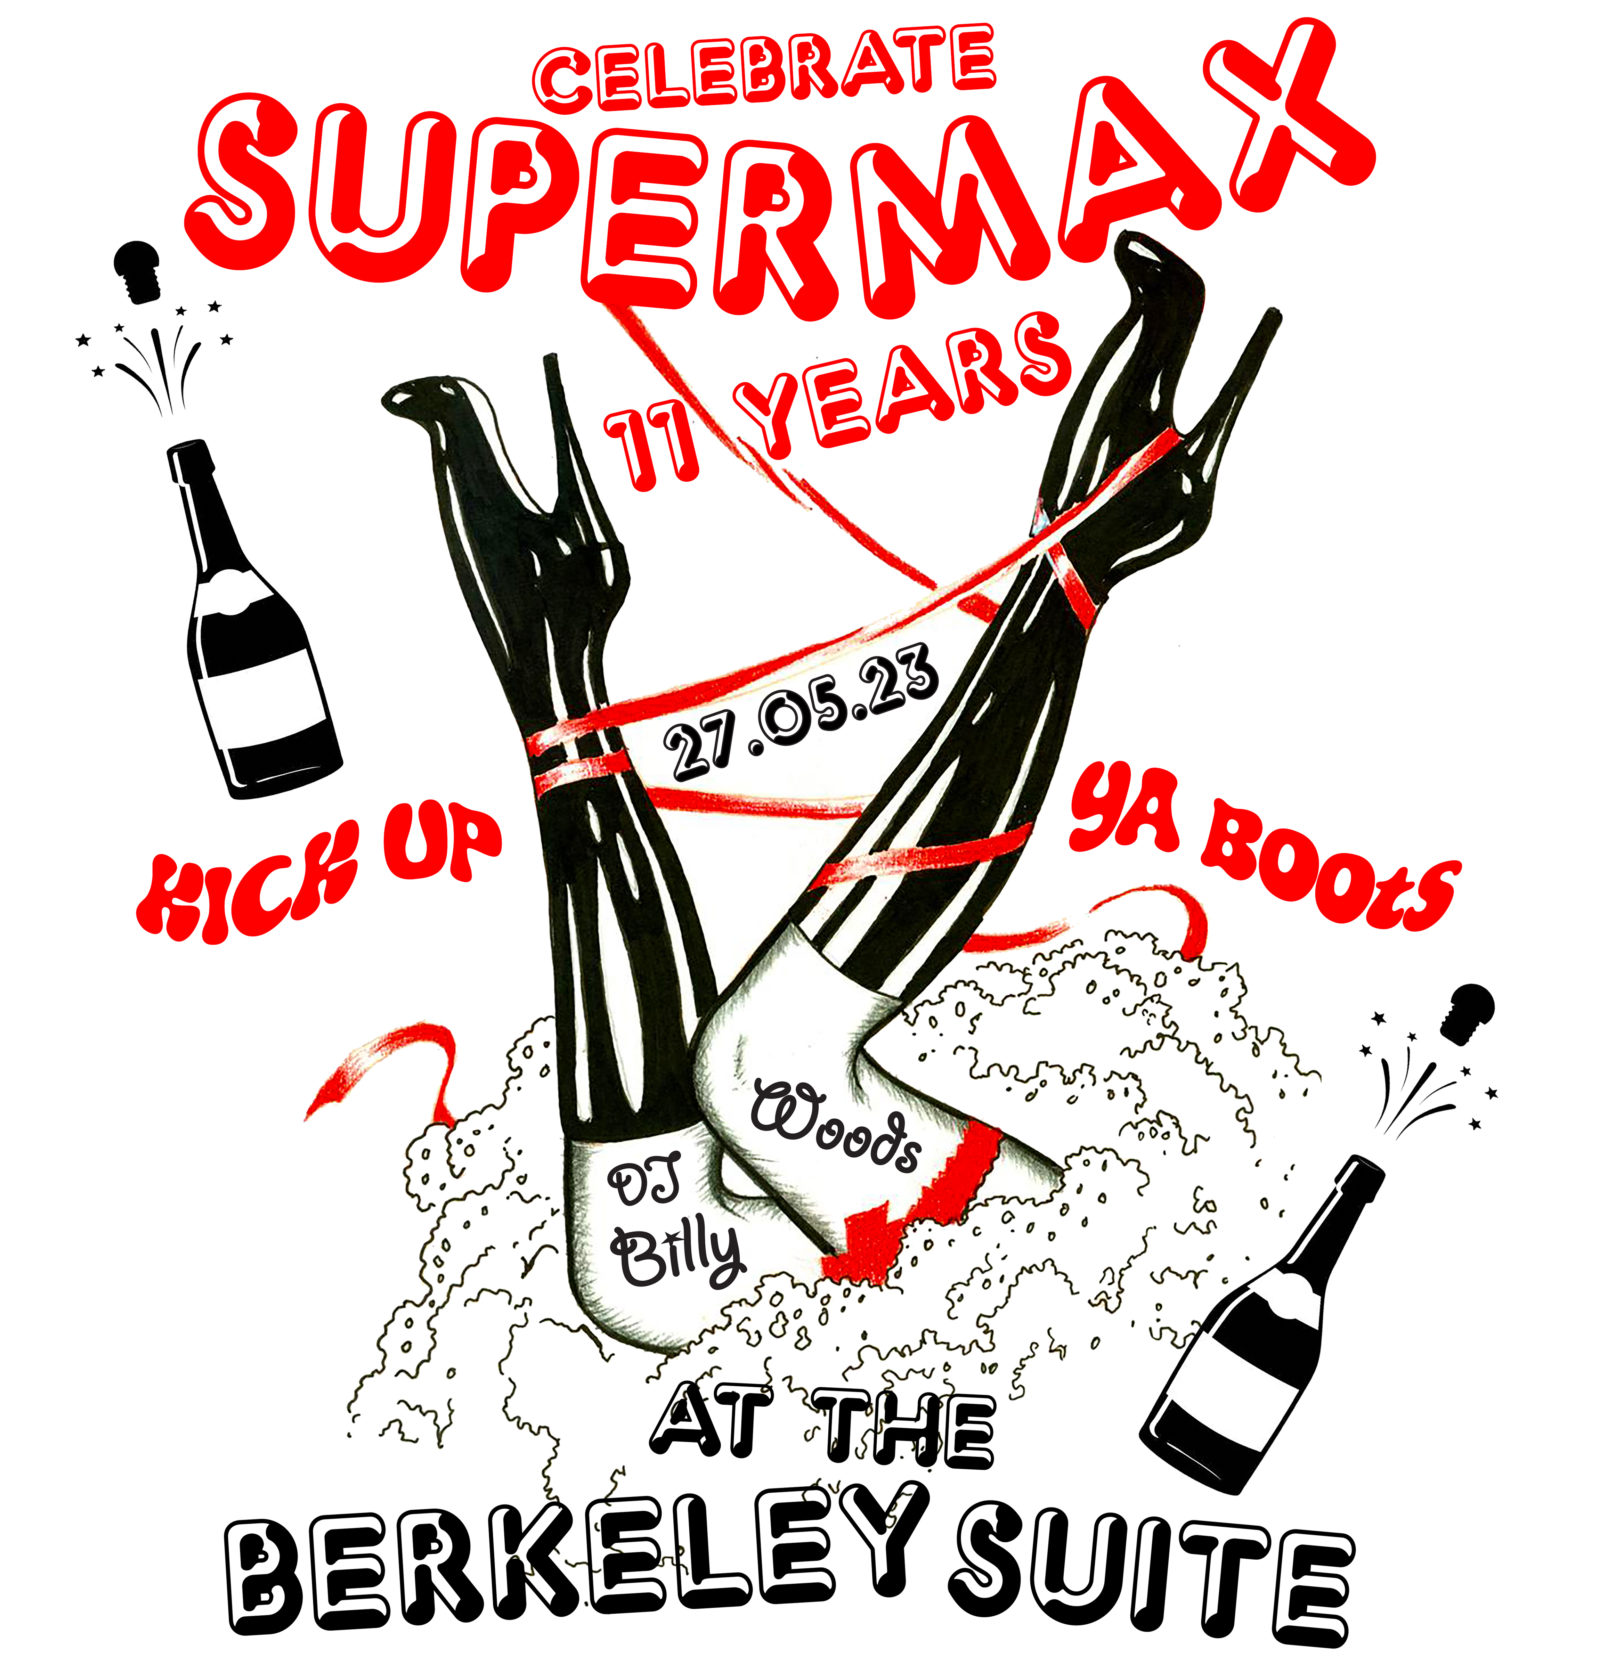 SUPERMAX! CELEBRATES 11 YEARS AT THE BERKELEY SUITE